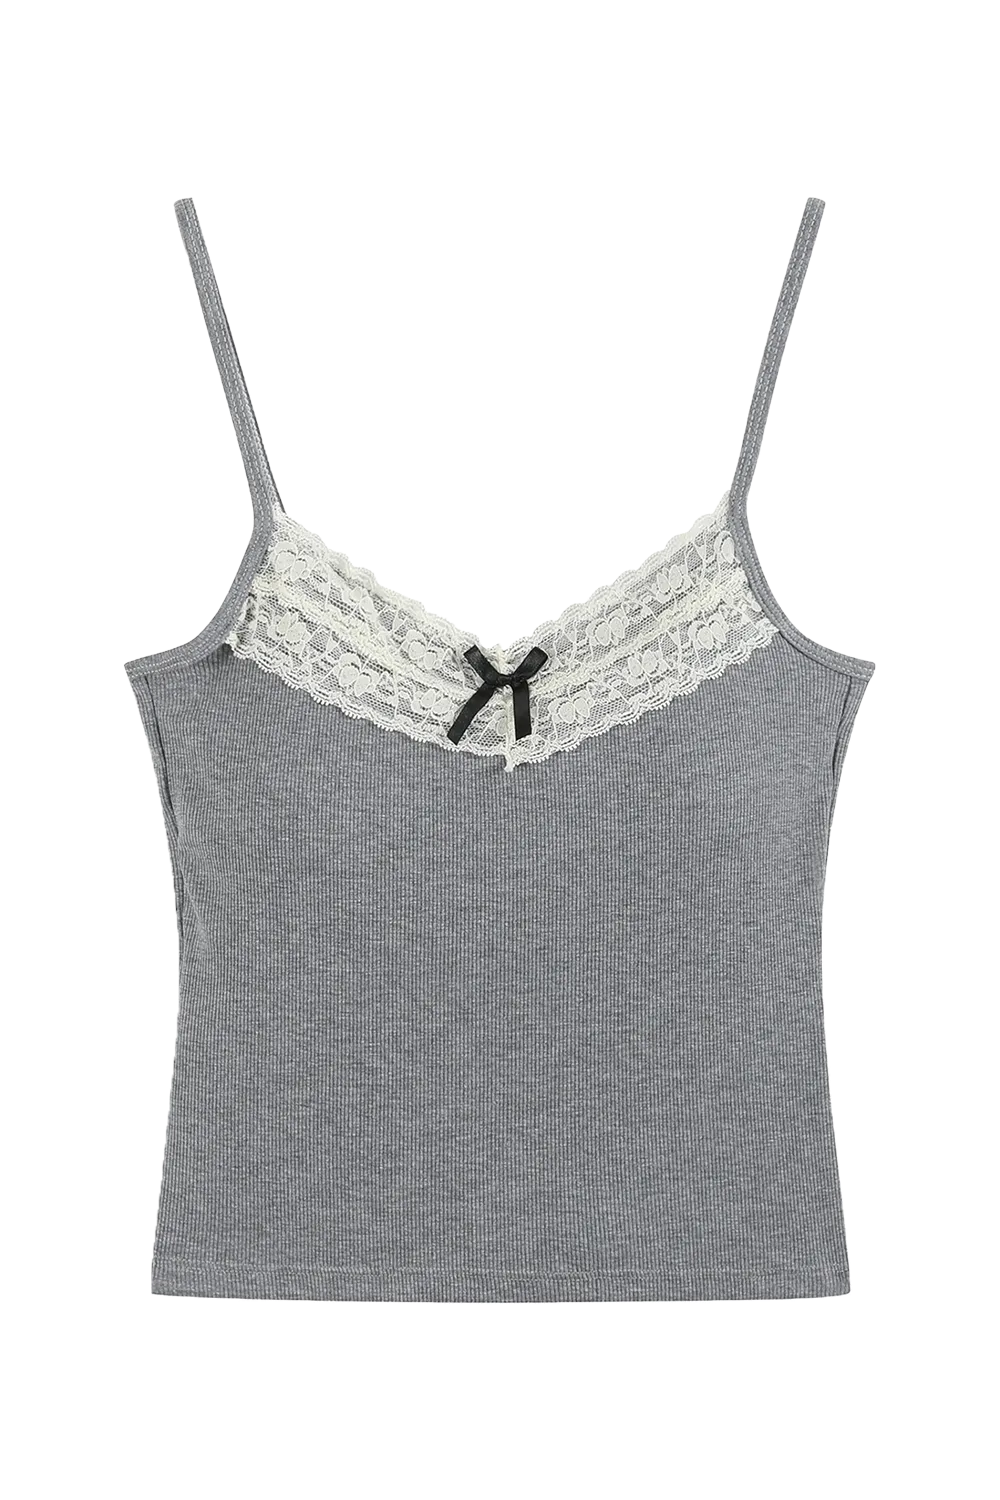 Women's Lace Trim Camisole Top with Delicate Bow Detail